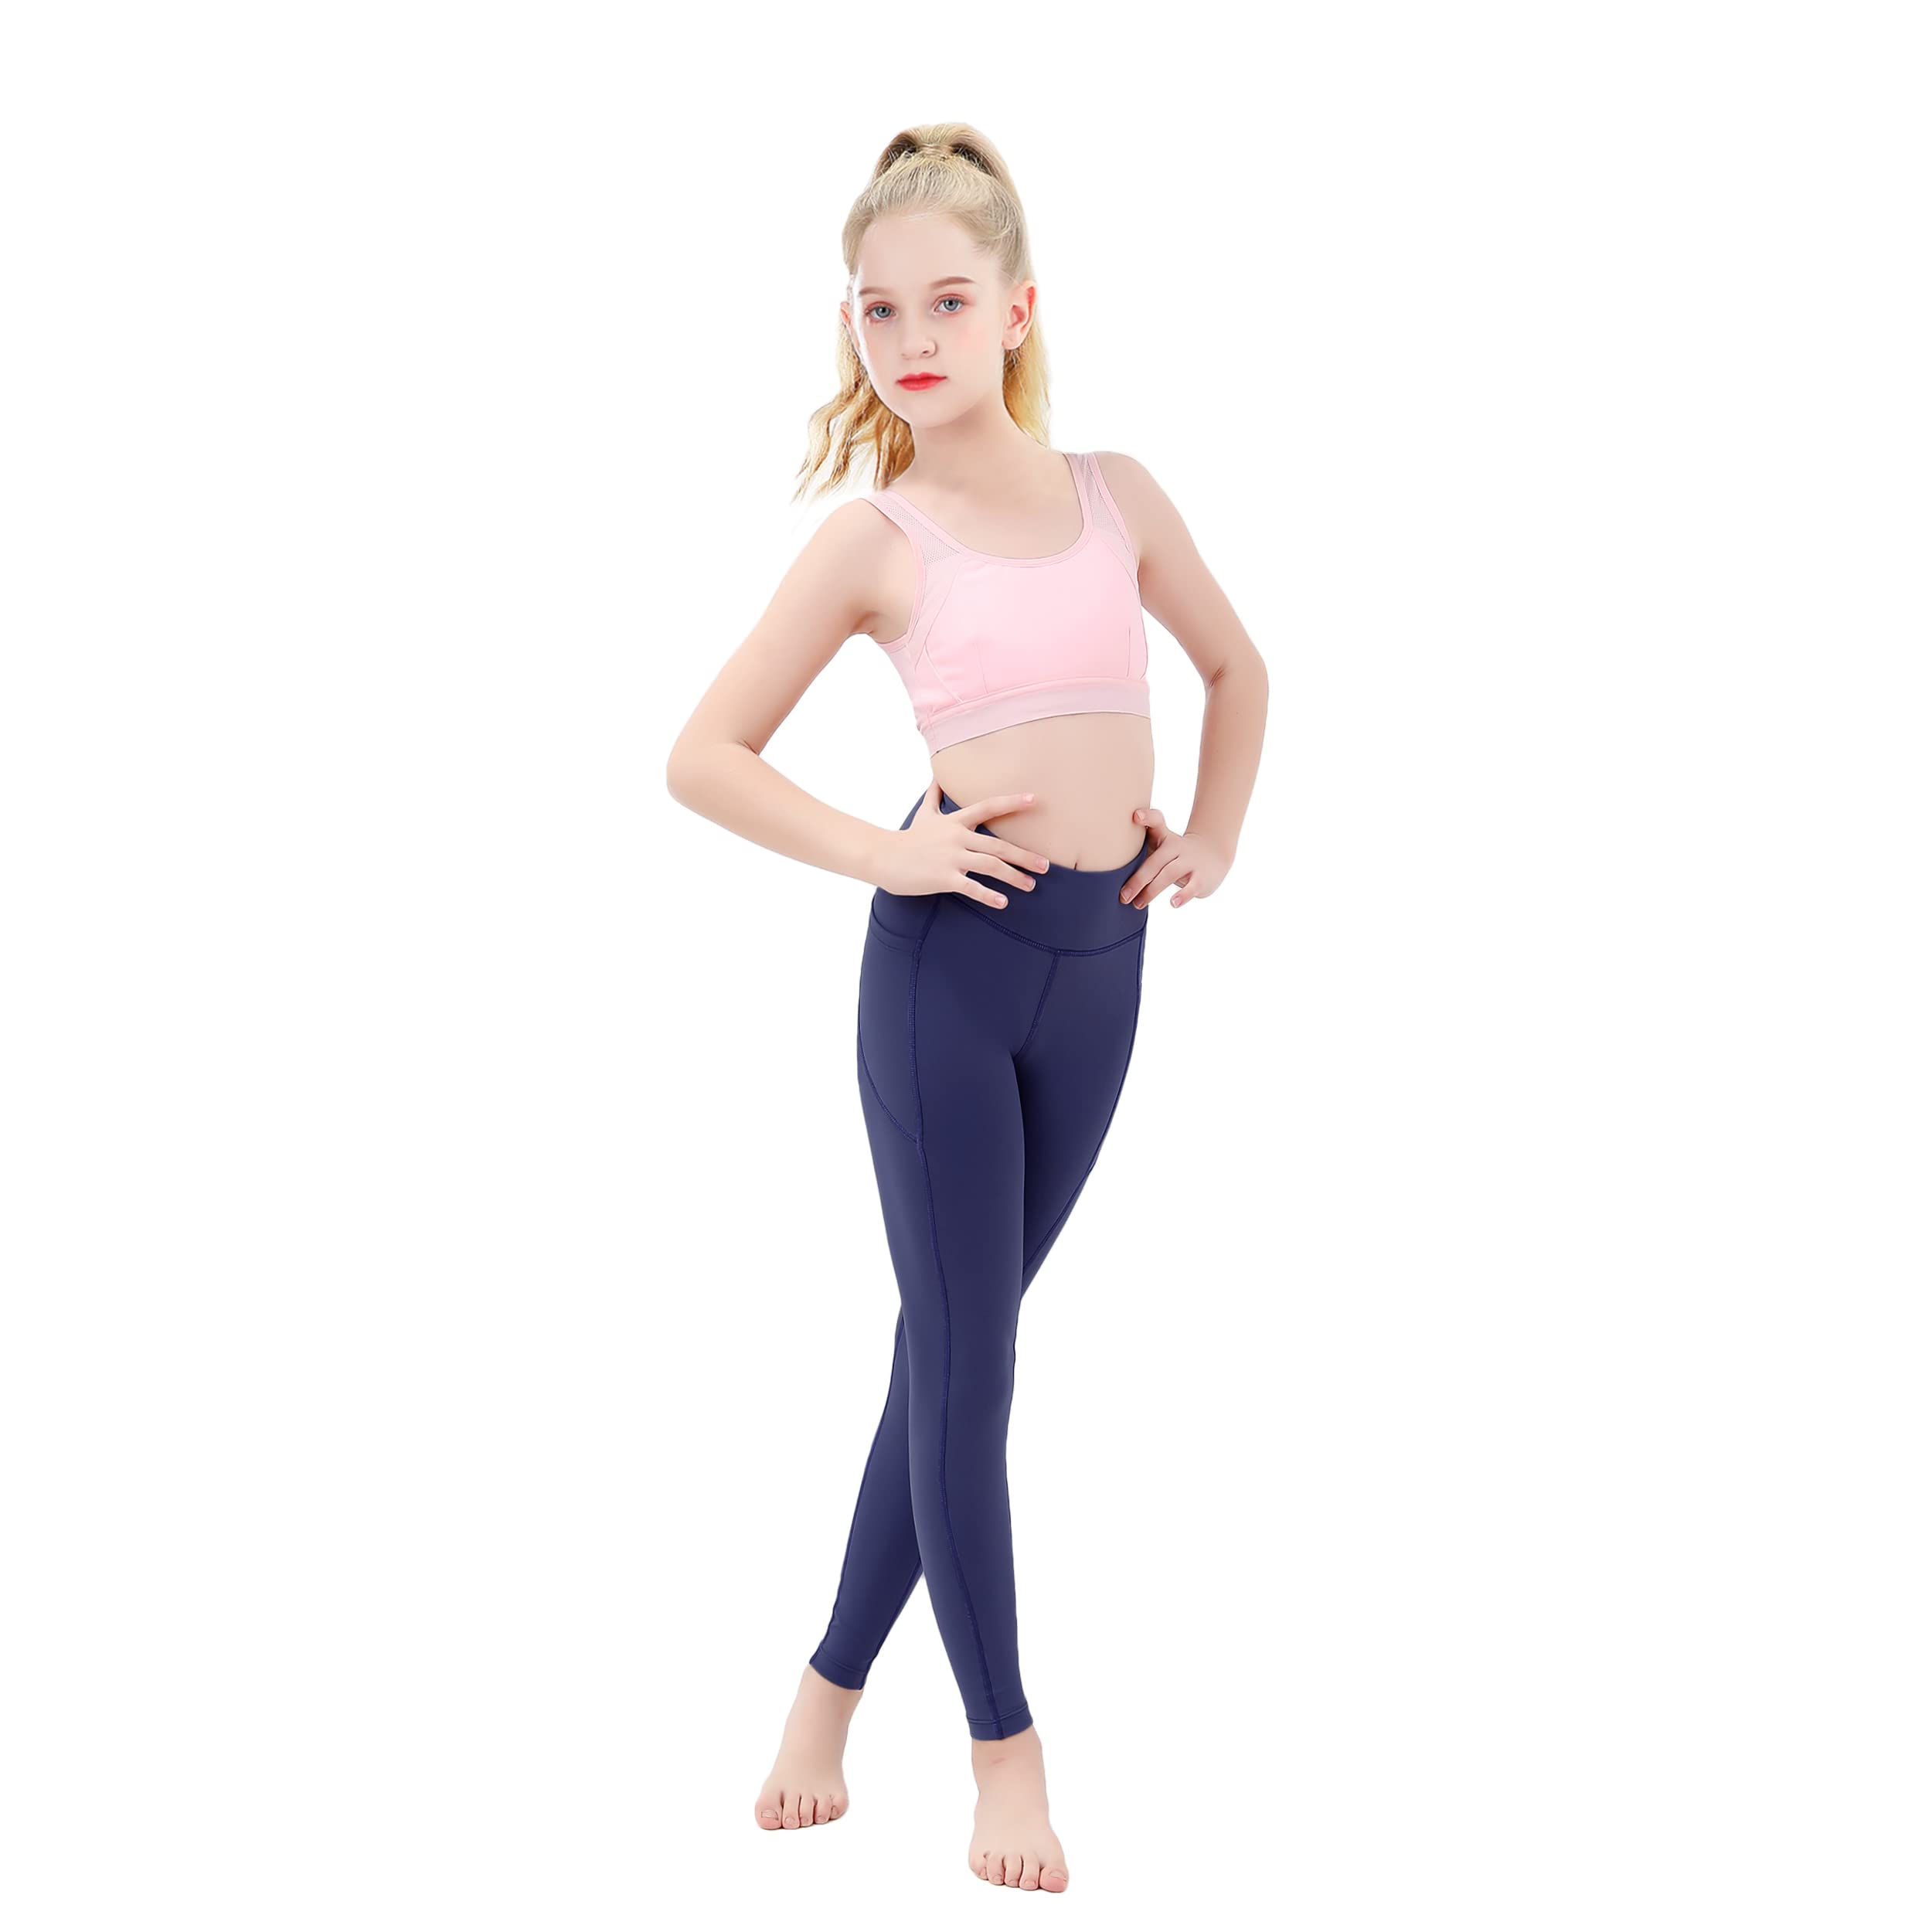 Tween Girls' Leggings Yoga Pants With Tight Pockets For Sports